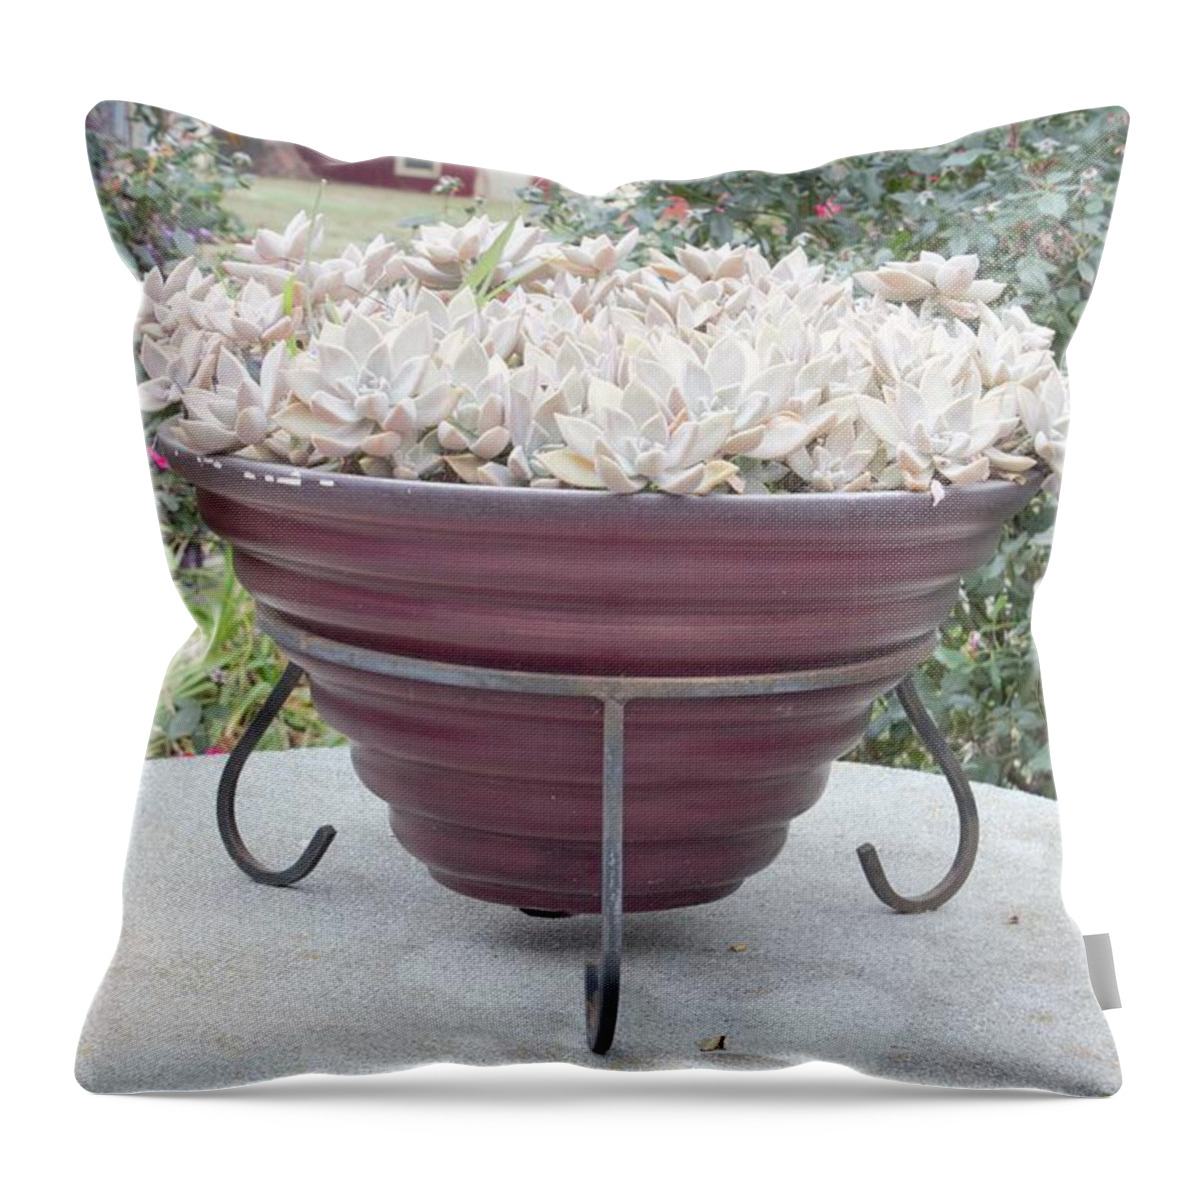 Plant Throw Pillow featuring the photograph Potted Perfection by Ali Baucom